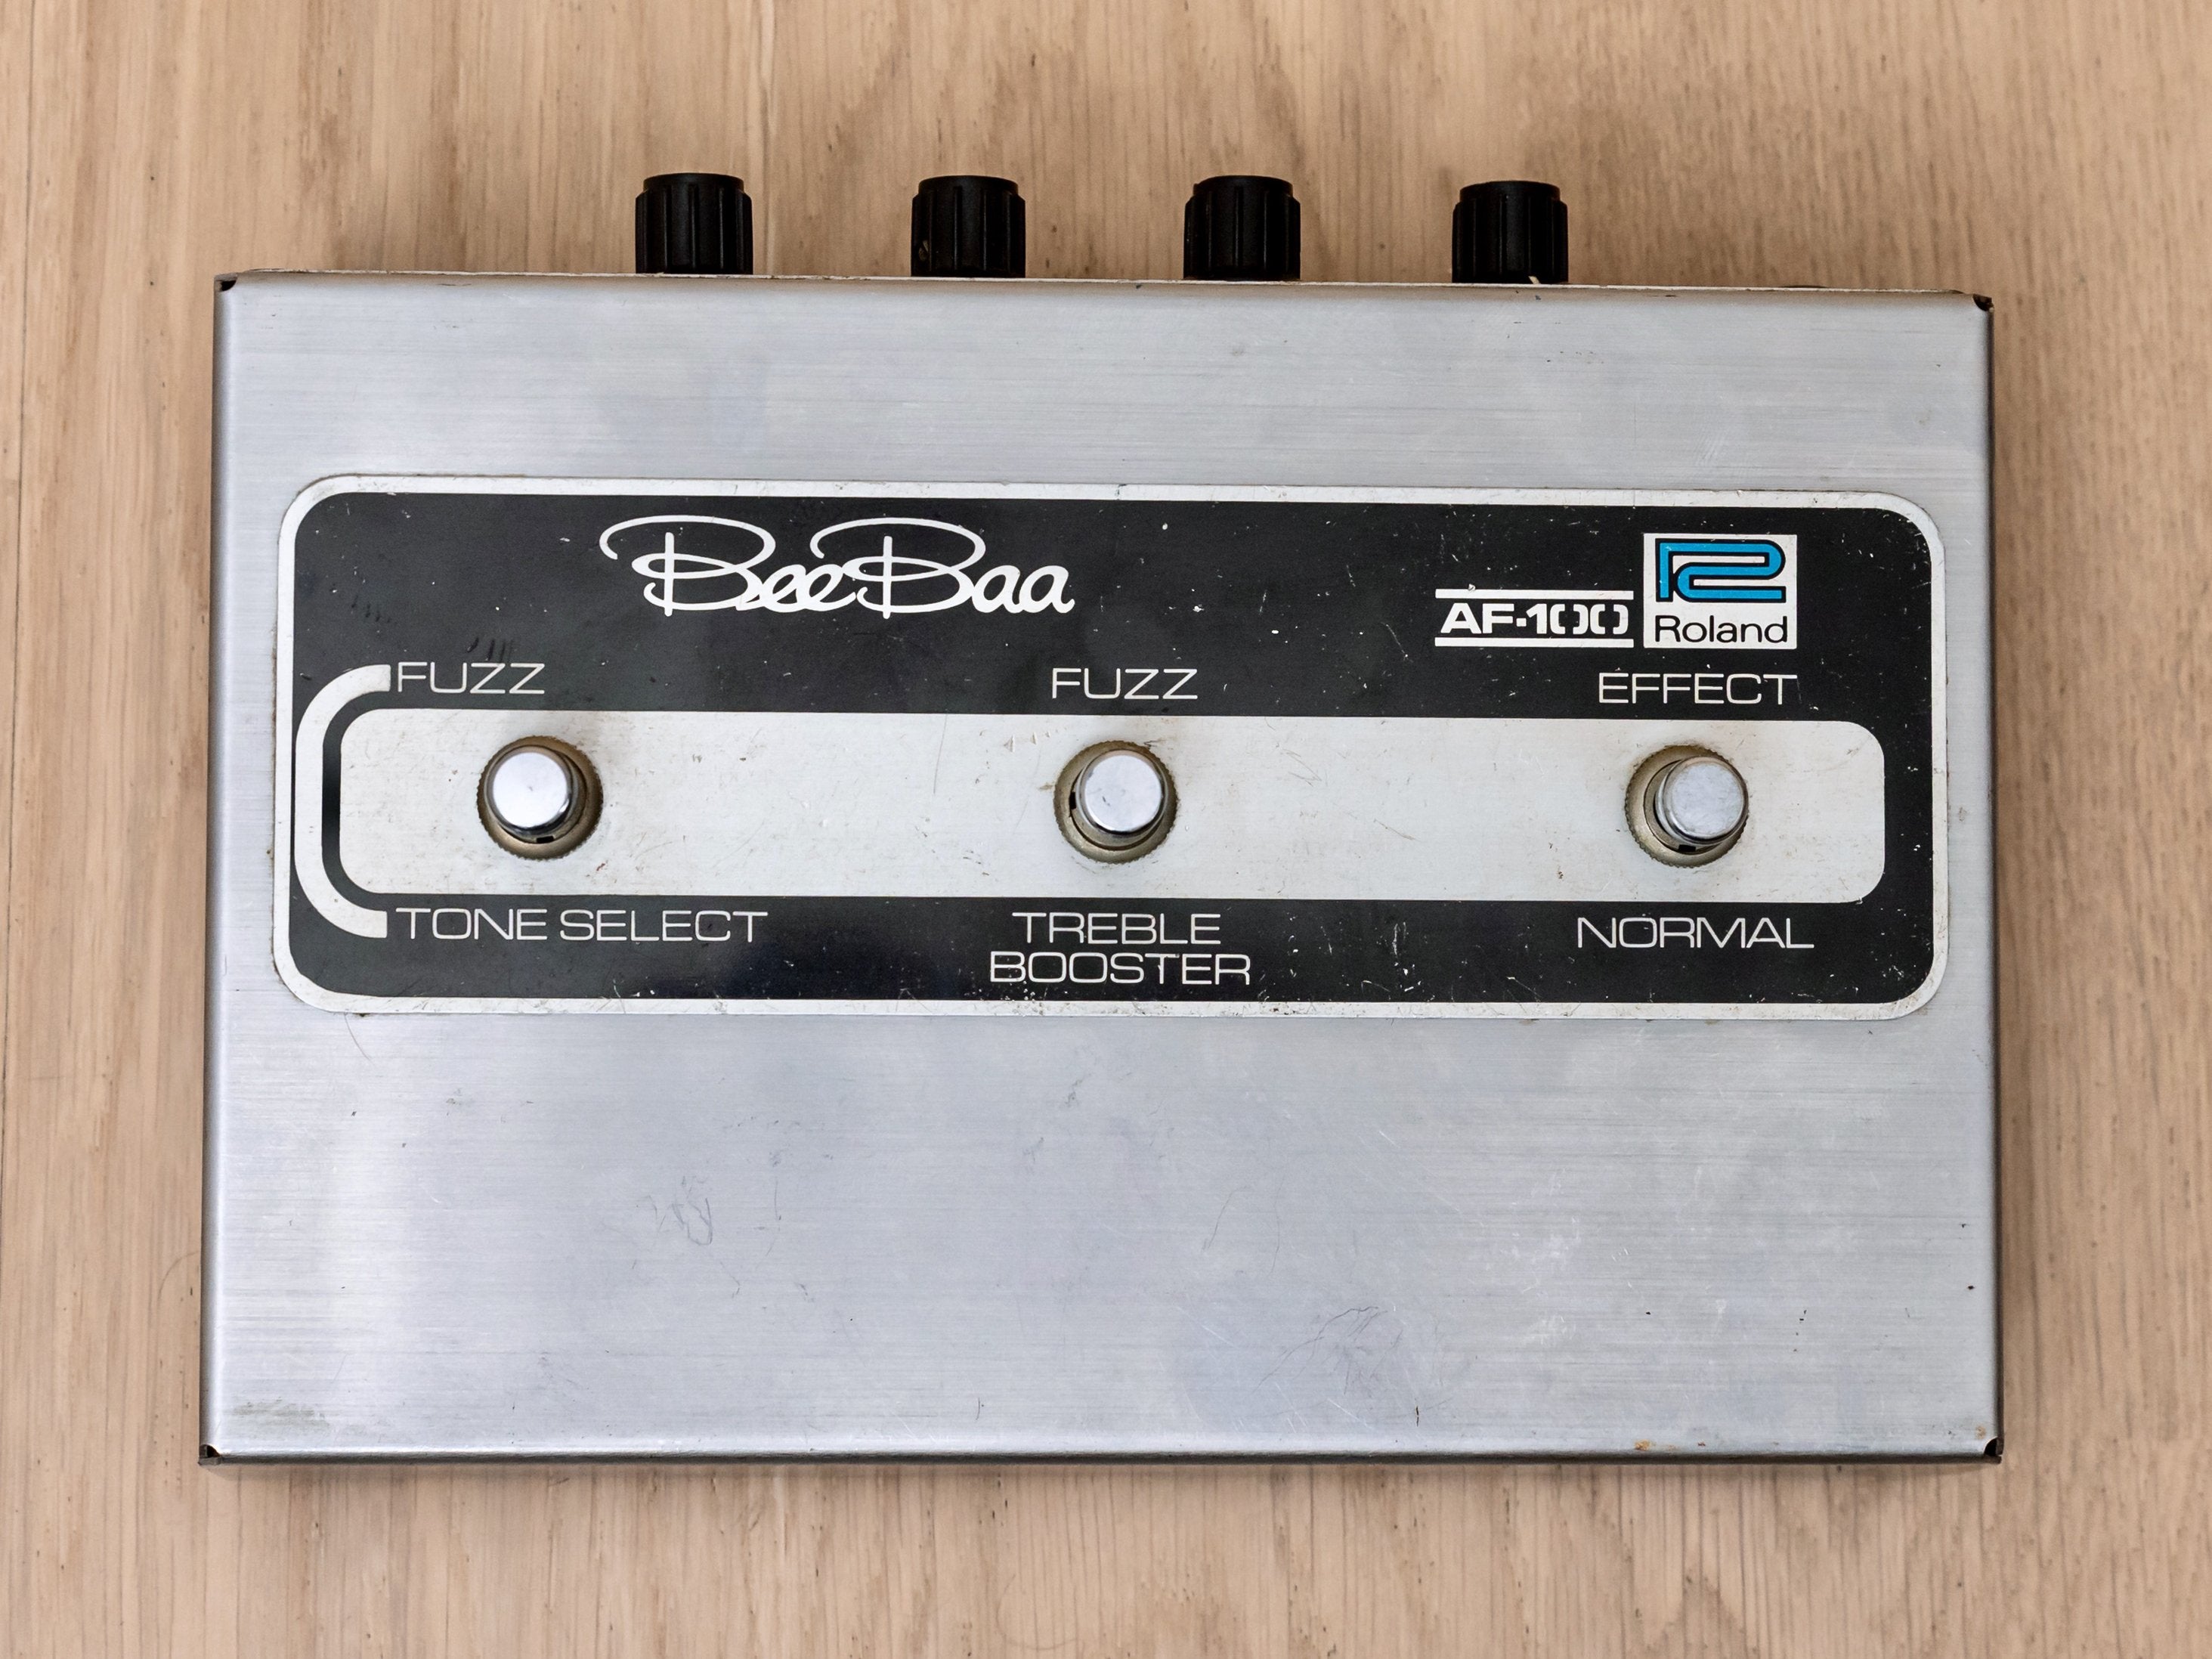 1970s Roland AF-100 BeeBaa Vintage Fuzz Guitar Effects Pedal